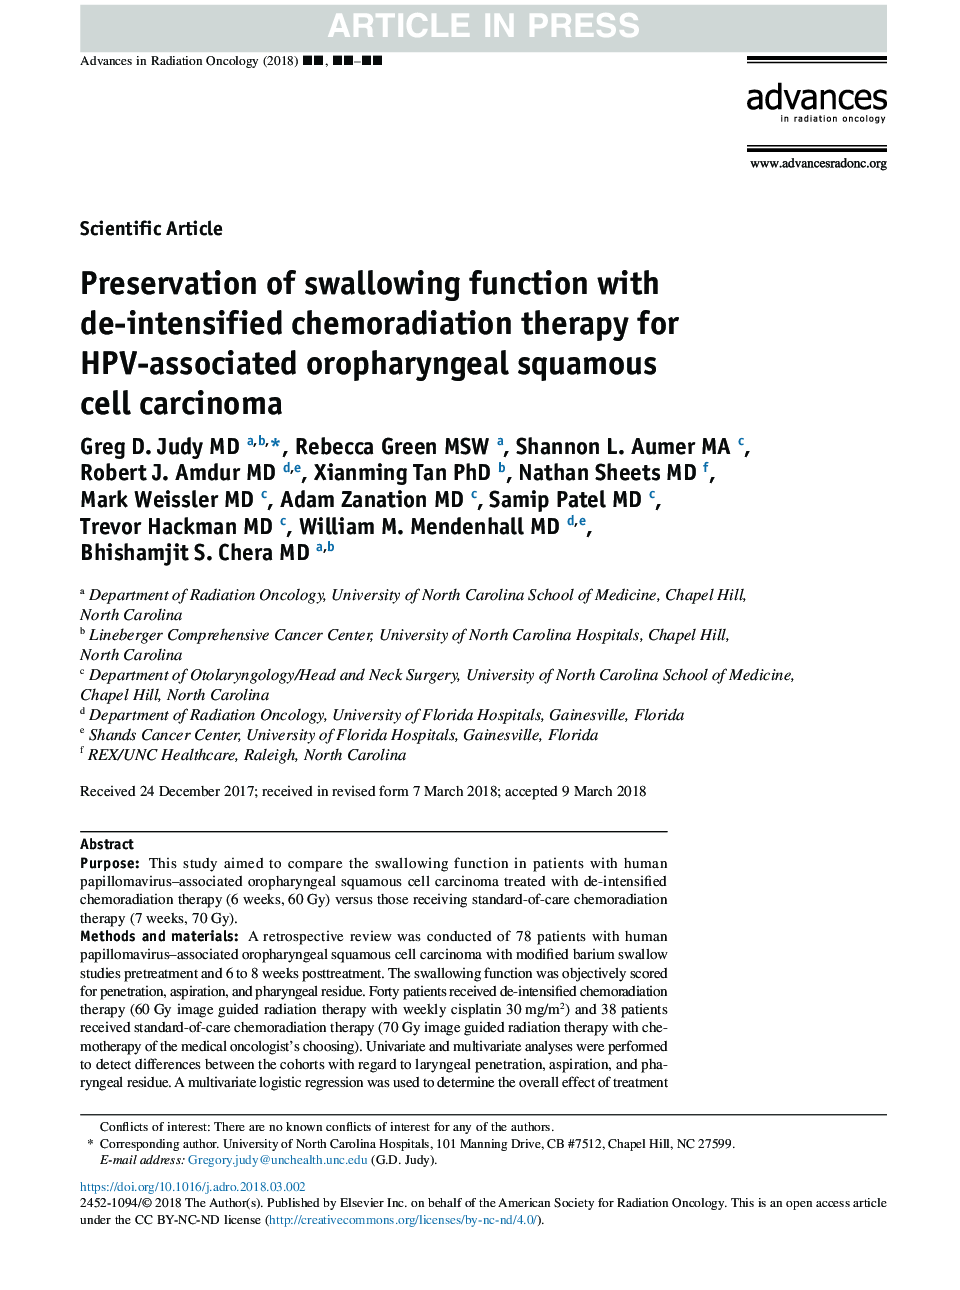 Preservation of swallowing function with de-intensified chemoradiation therapy for HPV-associated oropharyngeal squamous cell carcinoma